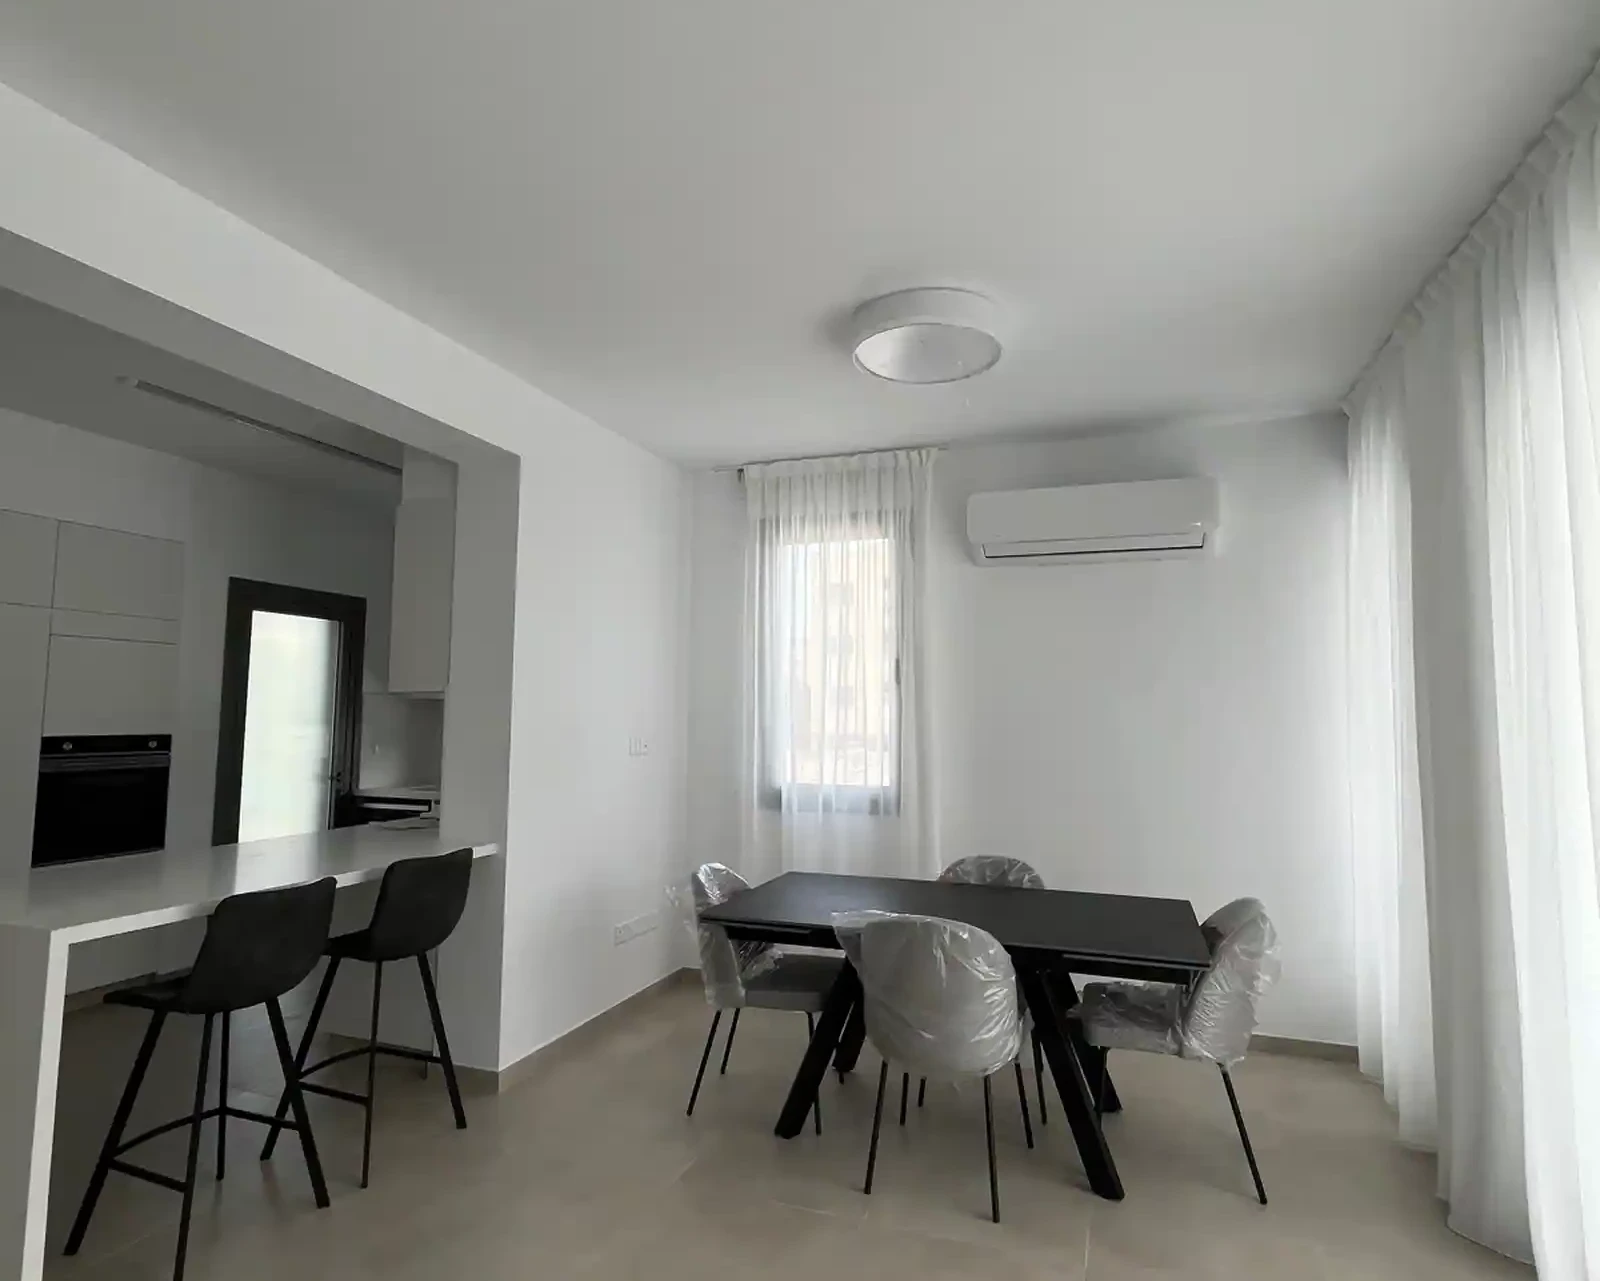 2-bedroom apartment to rent €2.300, image 1